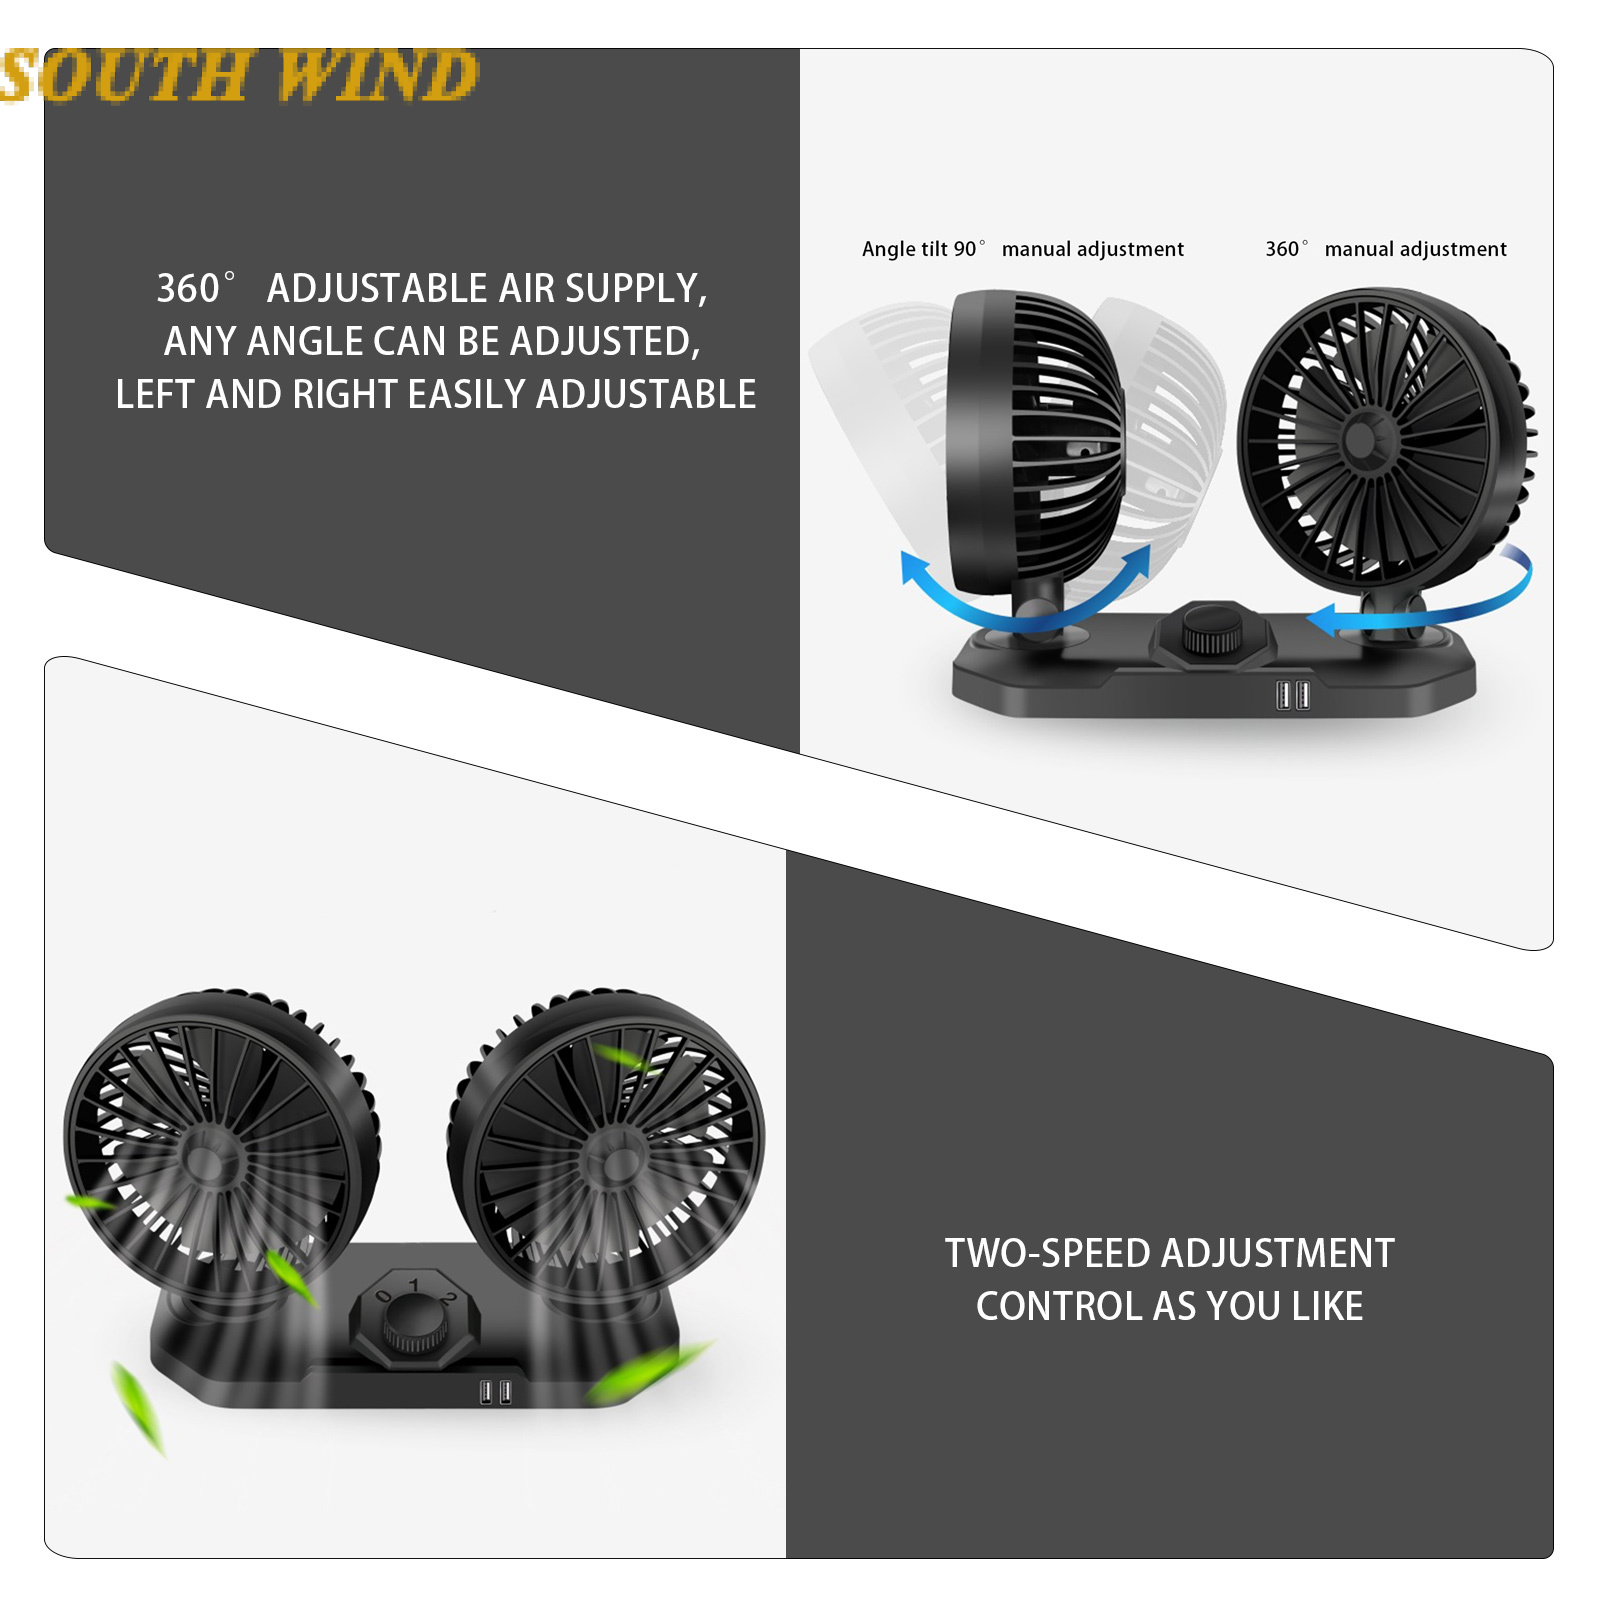 【SOUTH WIND】12V/24V Dual Head Car Fan Cooler 360 Degrees Adjustable Durable Cooler Fan Auto Air Conditioning Car Cooling Swing Fan